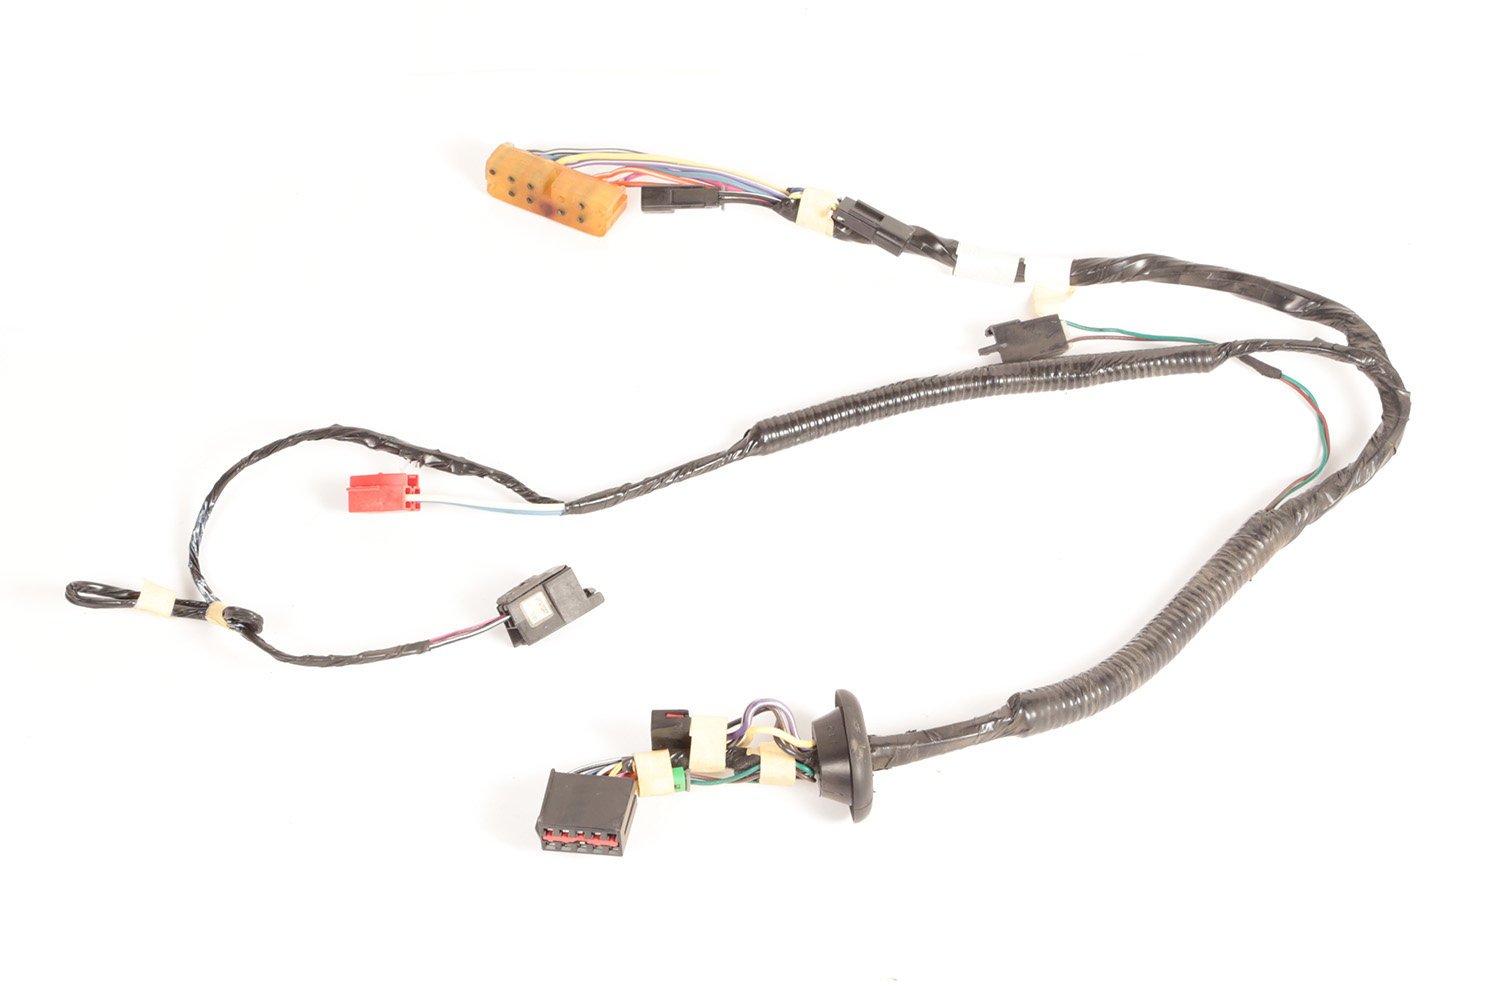 Wiring Harness For Jeep Cherokee from www.quadratec.com